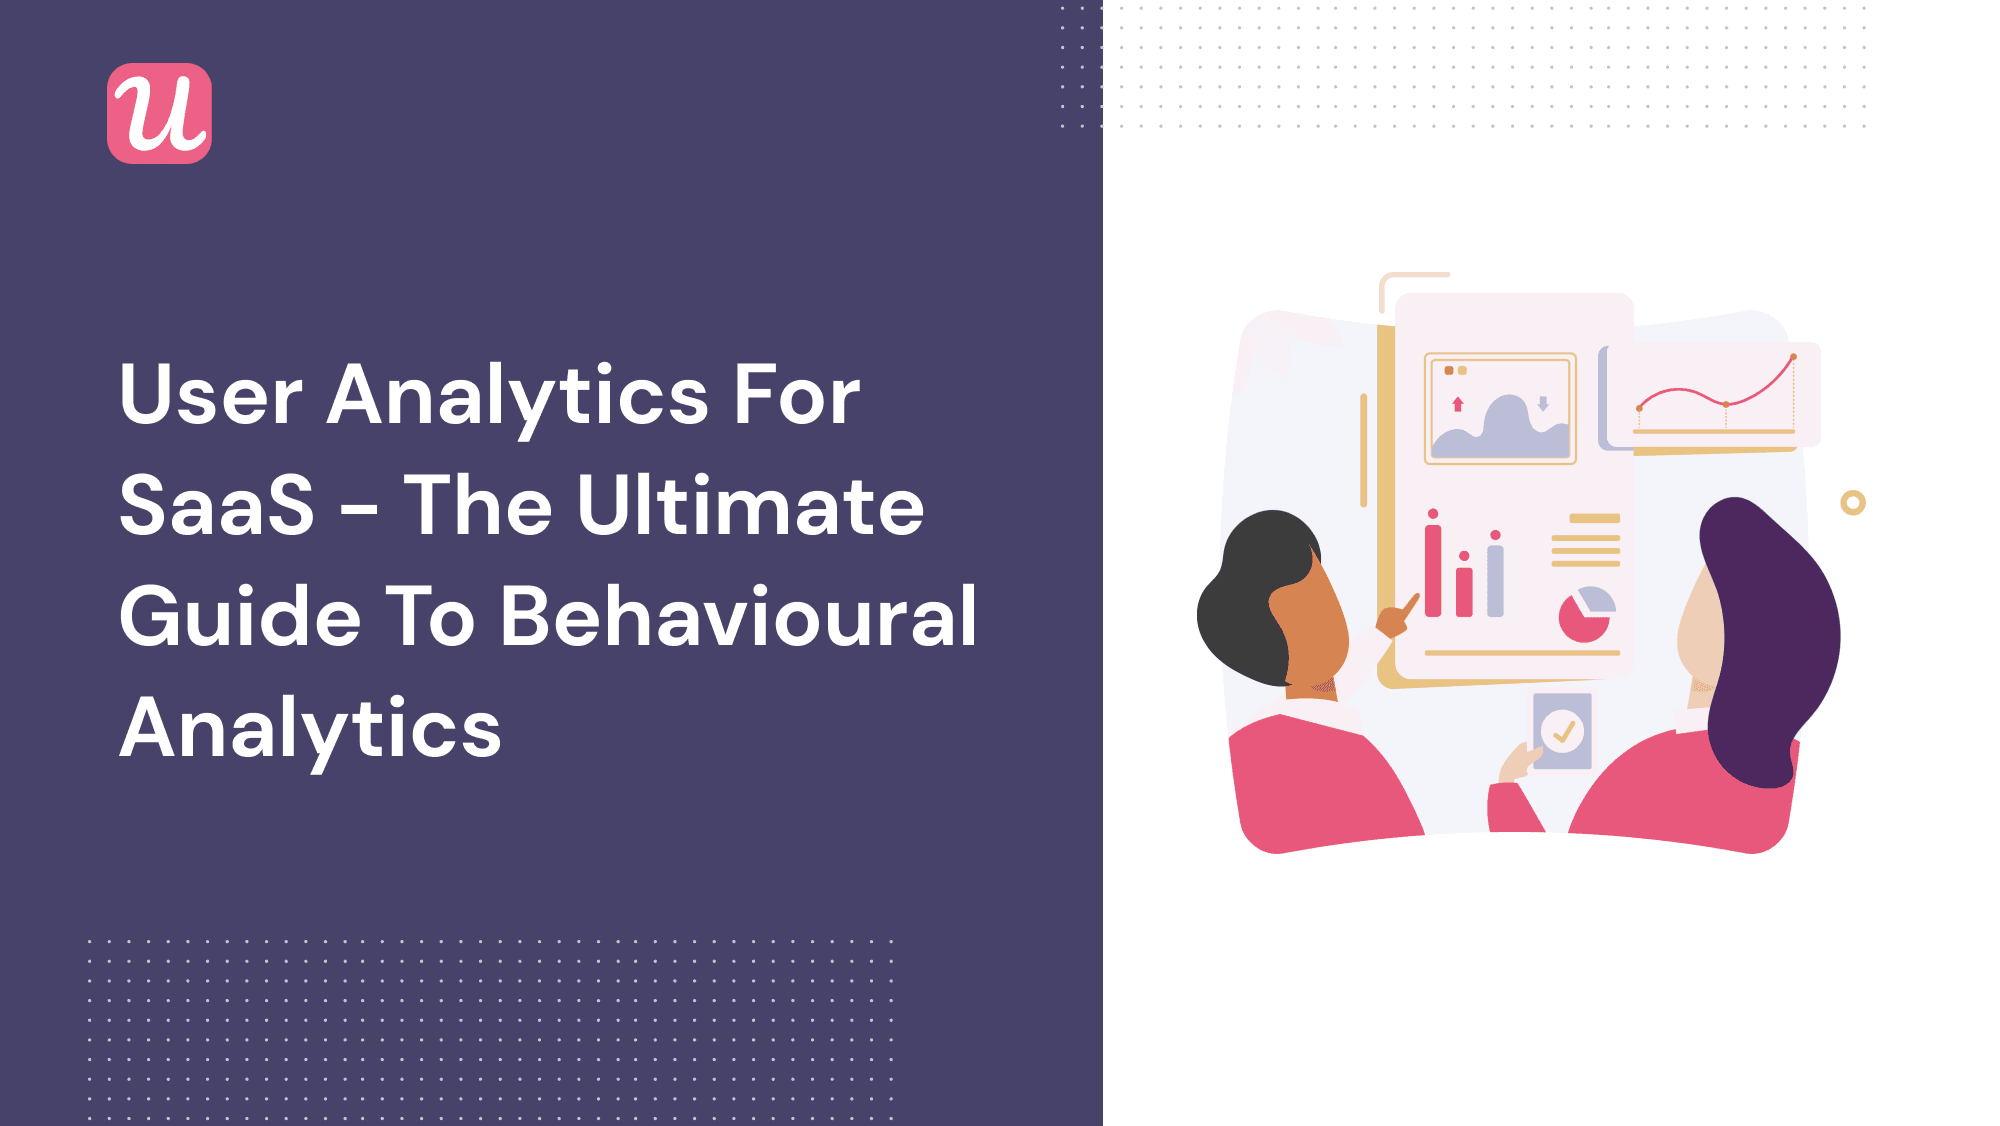 User Analytics for SaaS - The Ultimate Guide to Behavioural Analytics